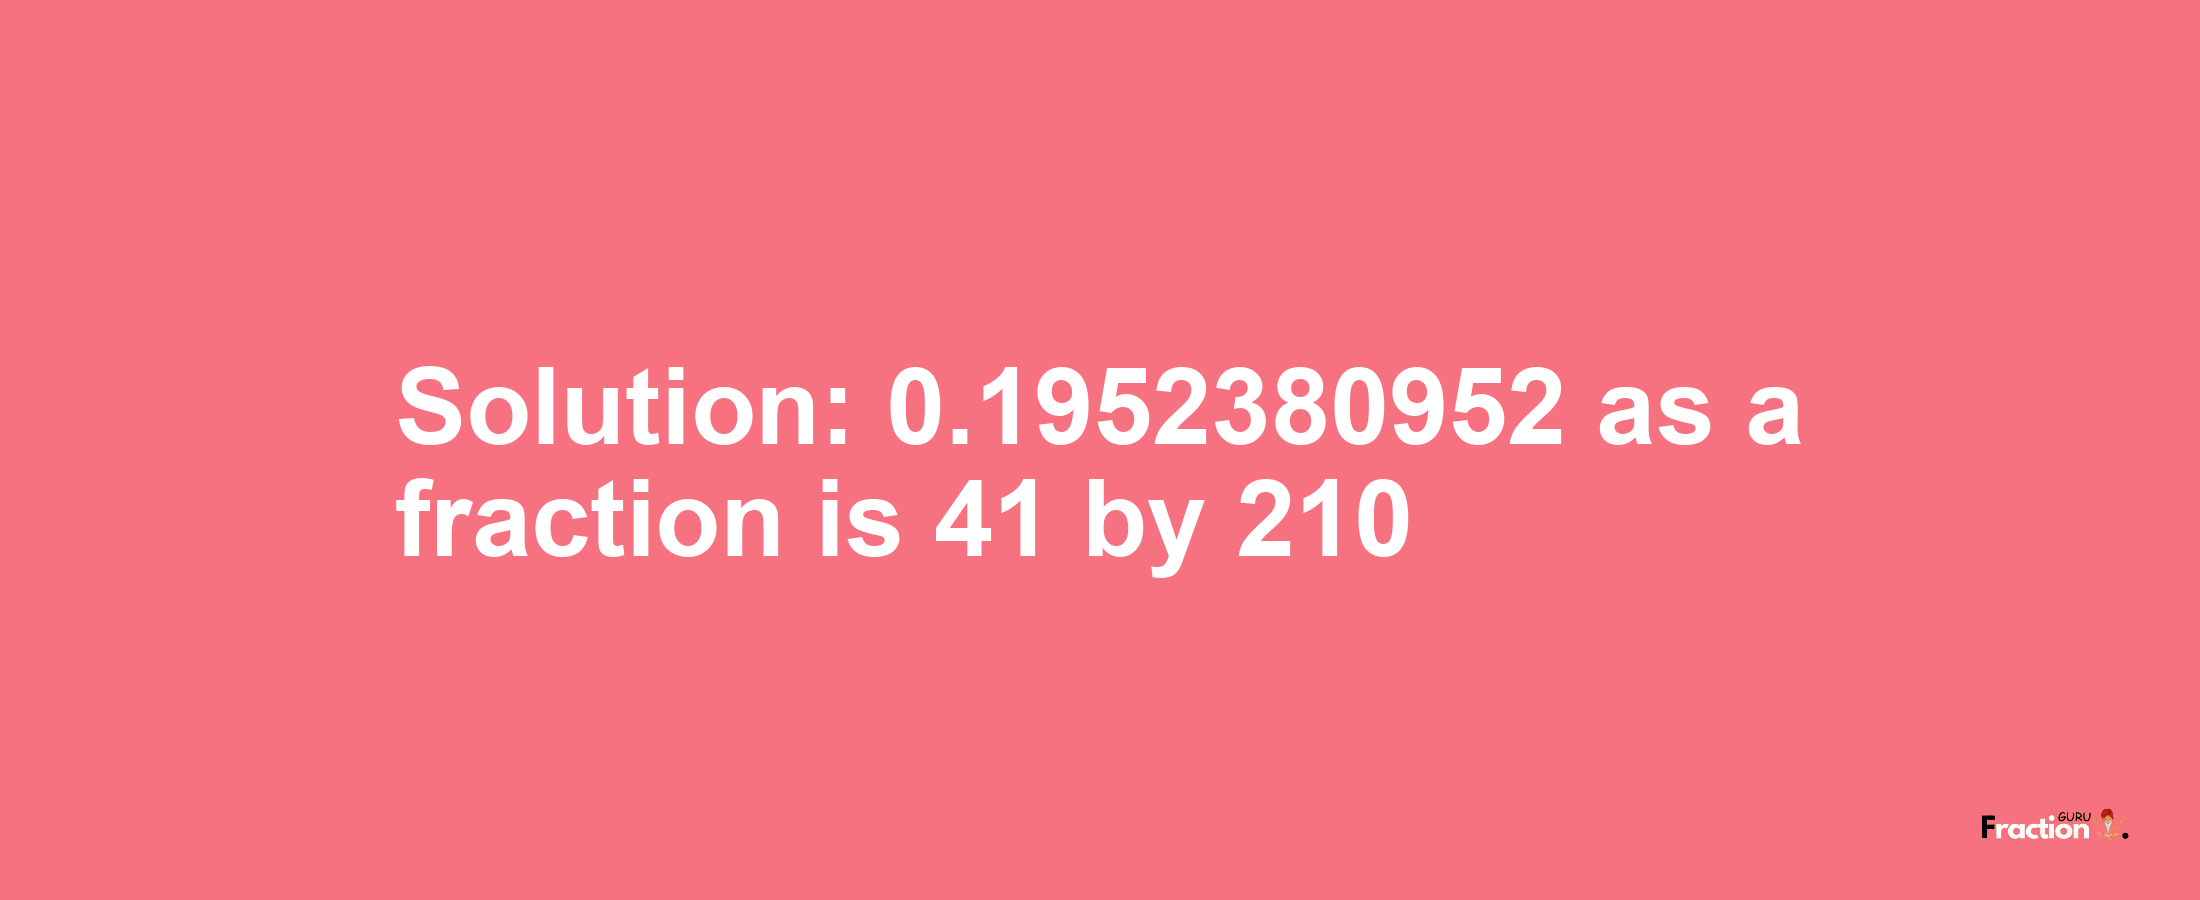 Solution:0.1952380952 as a fraction is 41/210